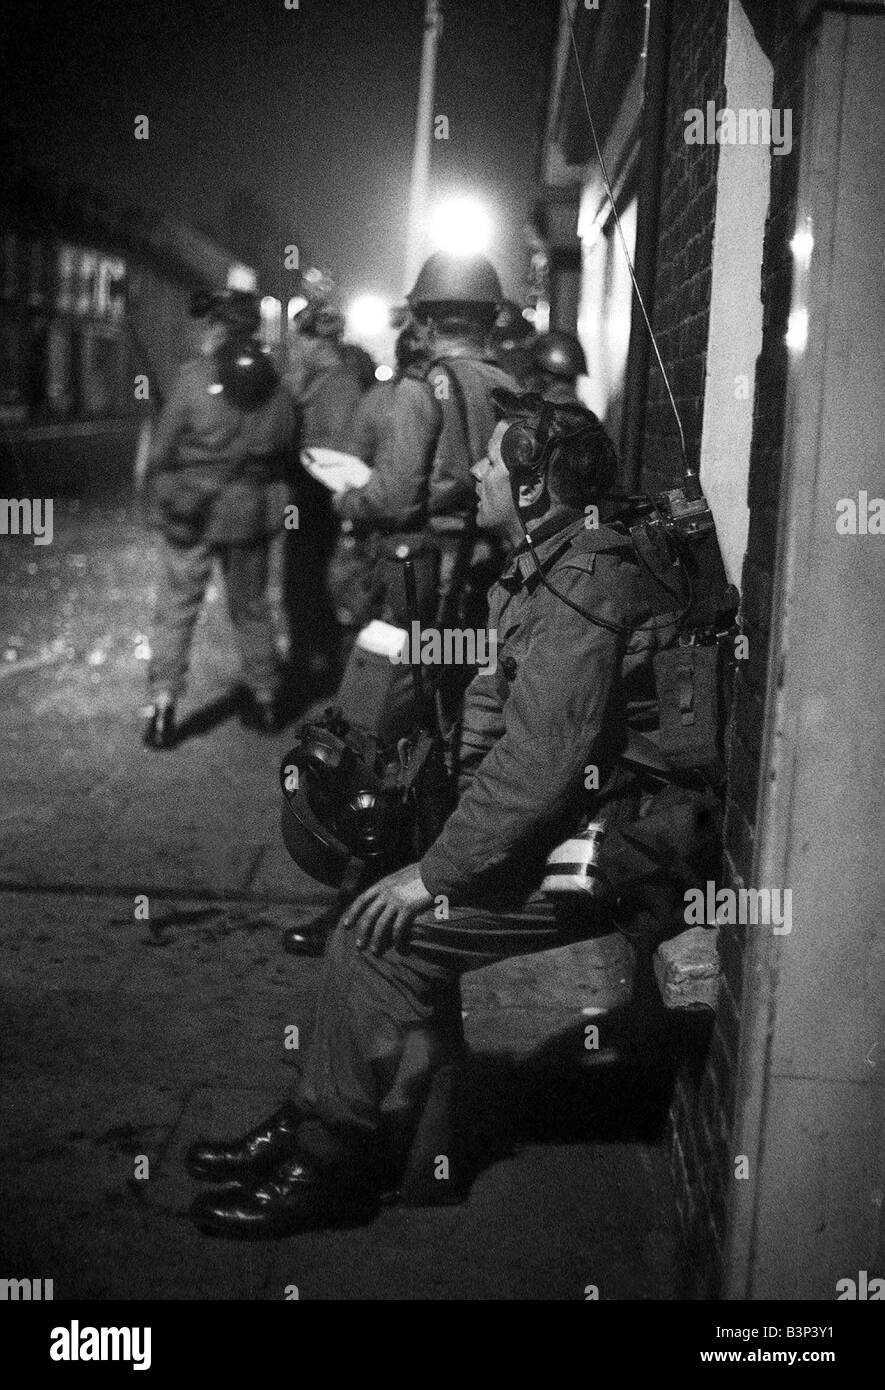 British Troops Army Soldiers October 1969 in Northern Ireland troops patrol the troubles In 1969 the Protestant unionist fanatics instigated a series of severe pre planned riots against the Catholics In August of 1969 the Protestants ripped through the streets of Belfast and Derry They went into neighborhoods and even some houses of Catholic people Then on August 12 the riots were turned over to the orange mobs of the UVF They blew clouds of tear gas through the Catholic neighborhoods On the 14th of August the Catholics rebelled through two days of vicious rioting During the two days of Stock Photo